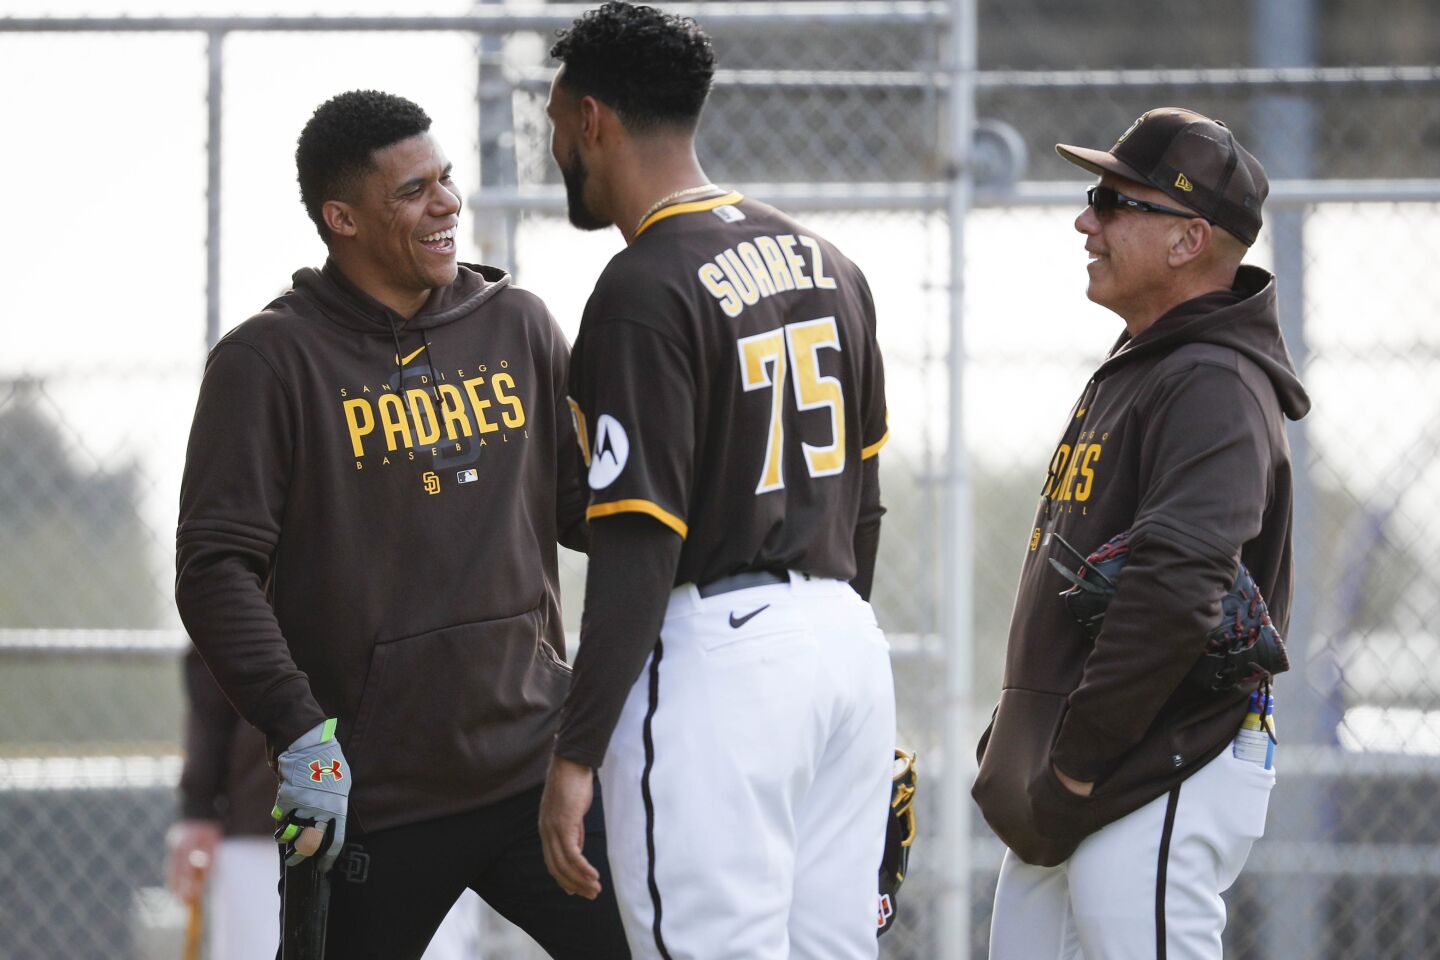 Padres right fielder Juan Soto (22) and relief pitcher Robert Suarez (75) chat with coaching stuff during a spring training practice at Peoria Sports Complex on Friday.